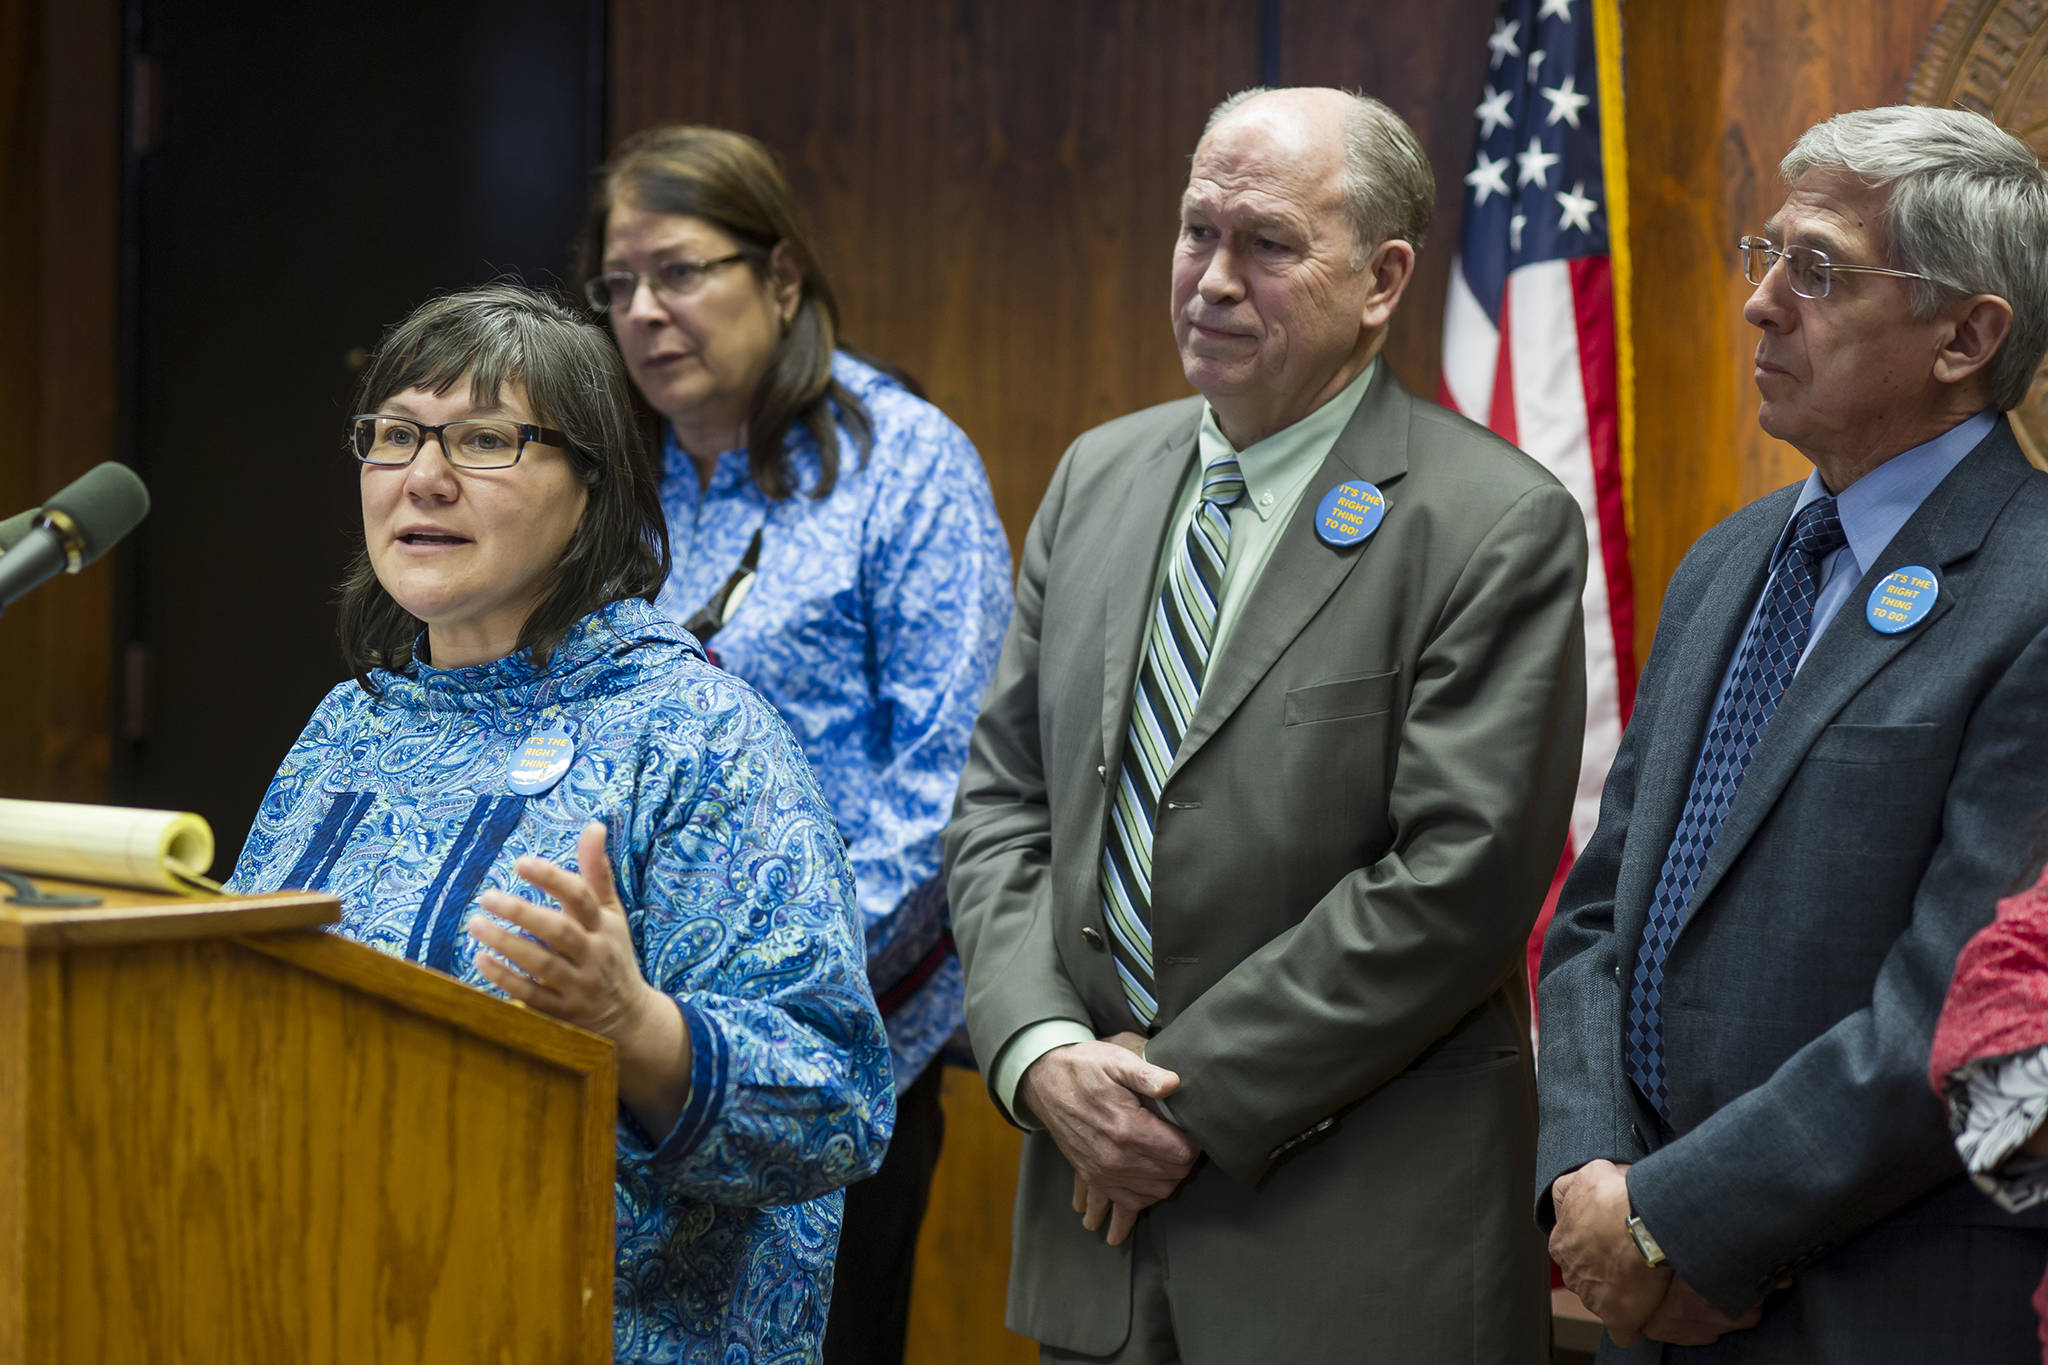 Valerie Davidson, Commissioner of the Department of Health and Social Services, left, speaks during a press conference with Gov. Bill Walker, center, and Lt. Gov. Byron Mallott in April 2015. Mallott resigned Tuesday over “inappropriate comments” he made. Davidson was sworn in as Lieutenant Governor.